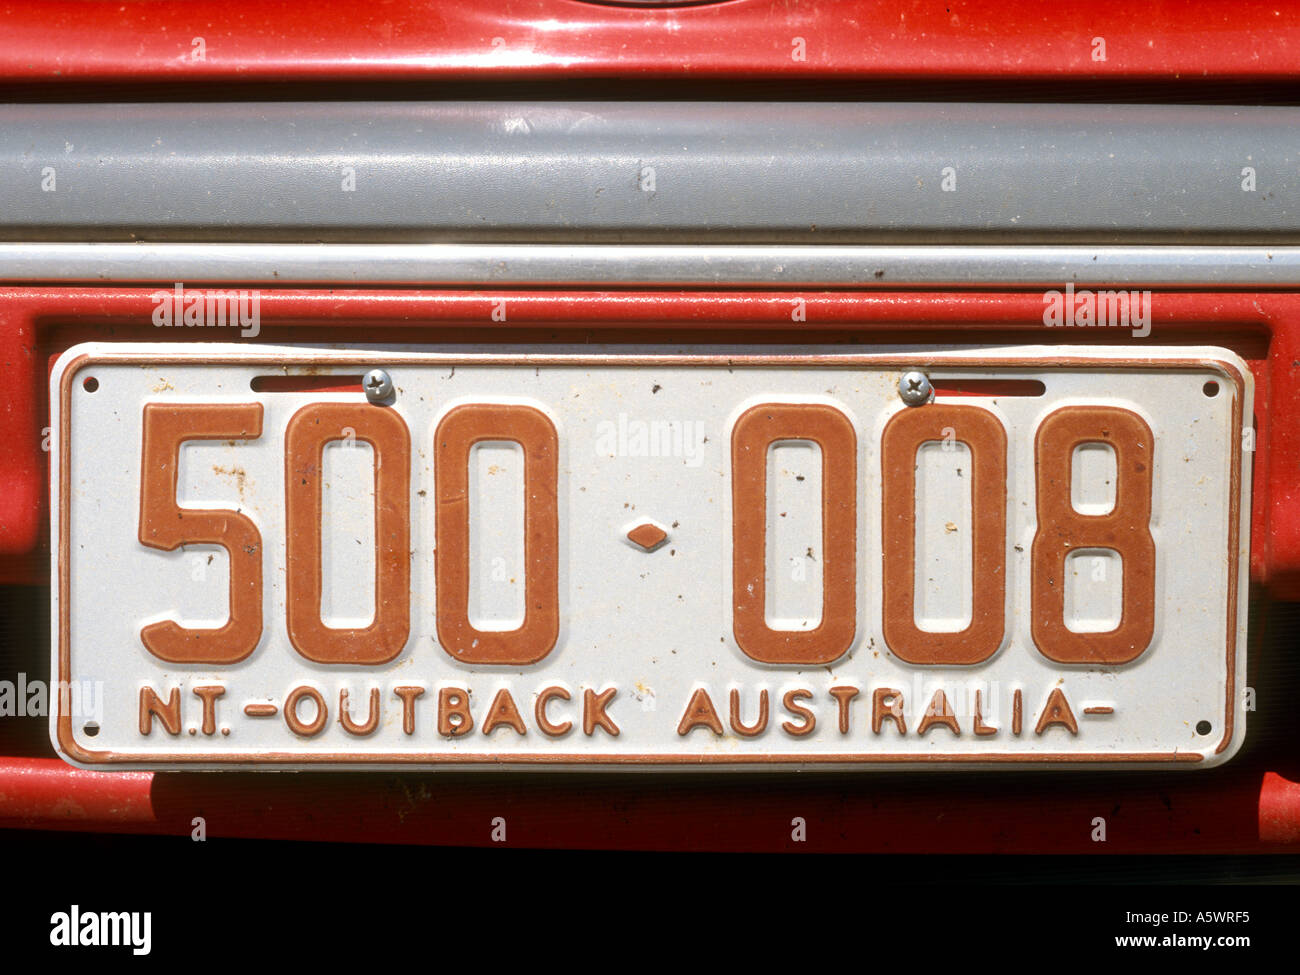 Car Number Plate, Northern Territory, Australia Stock Photo